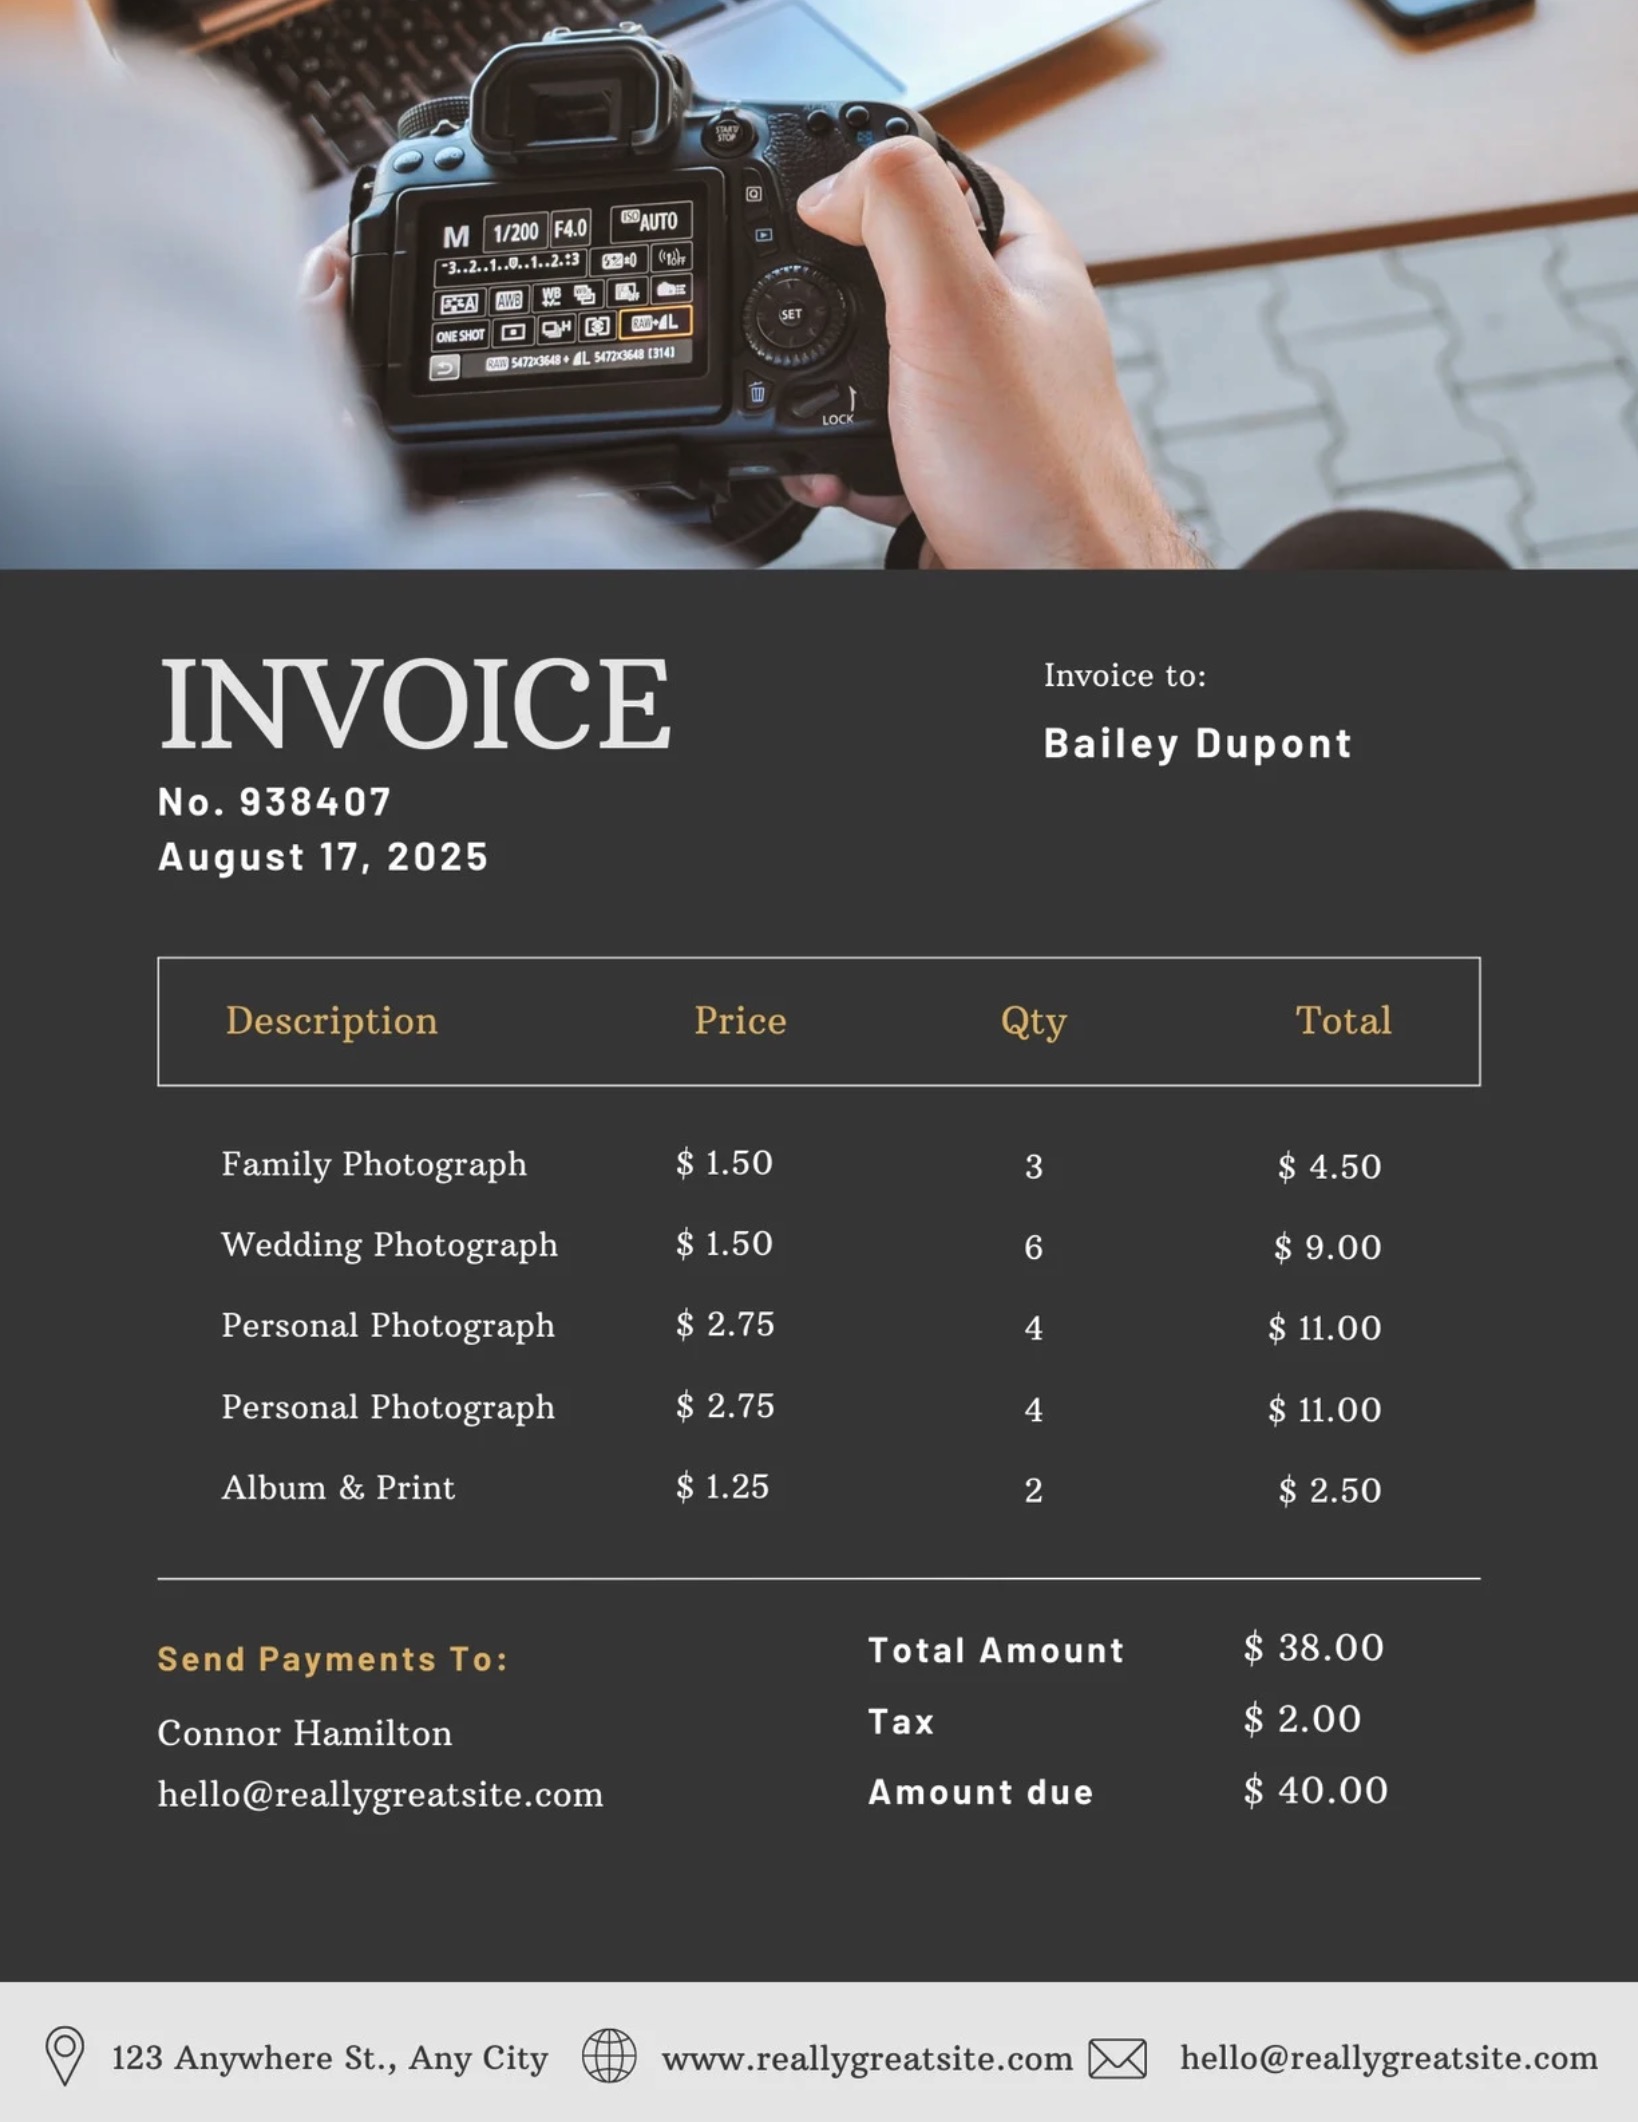 An invoice template with a person holding a camera.